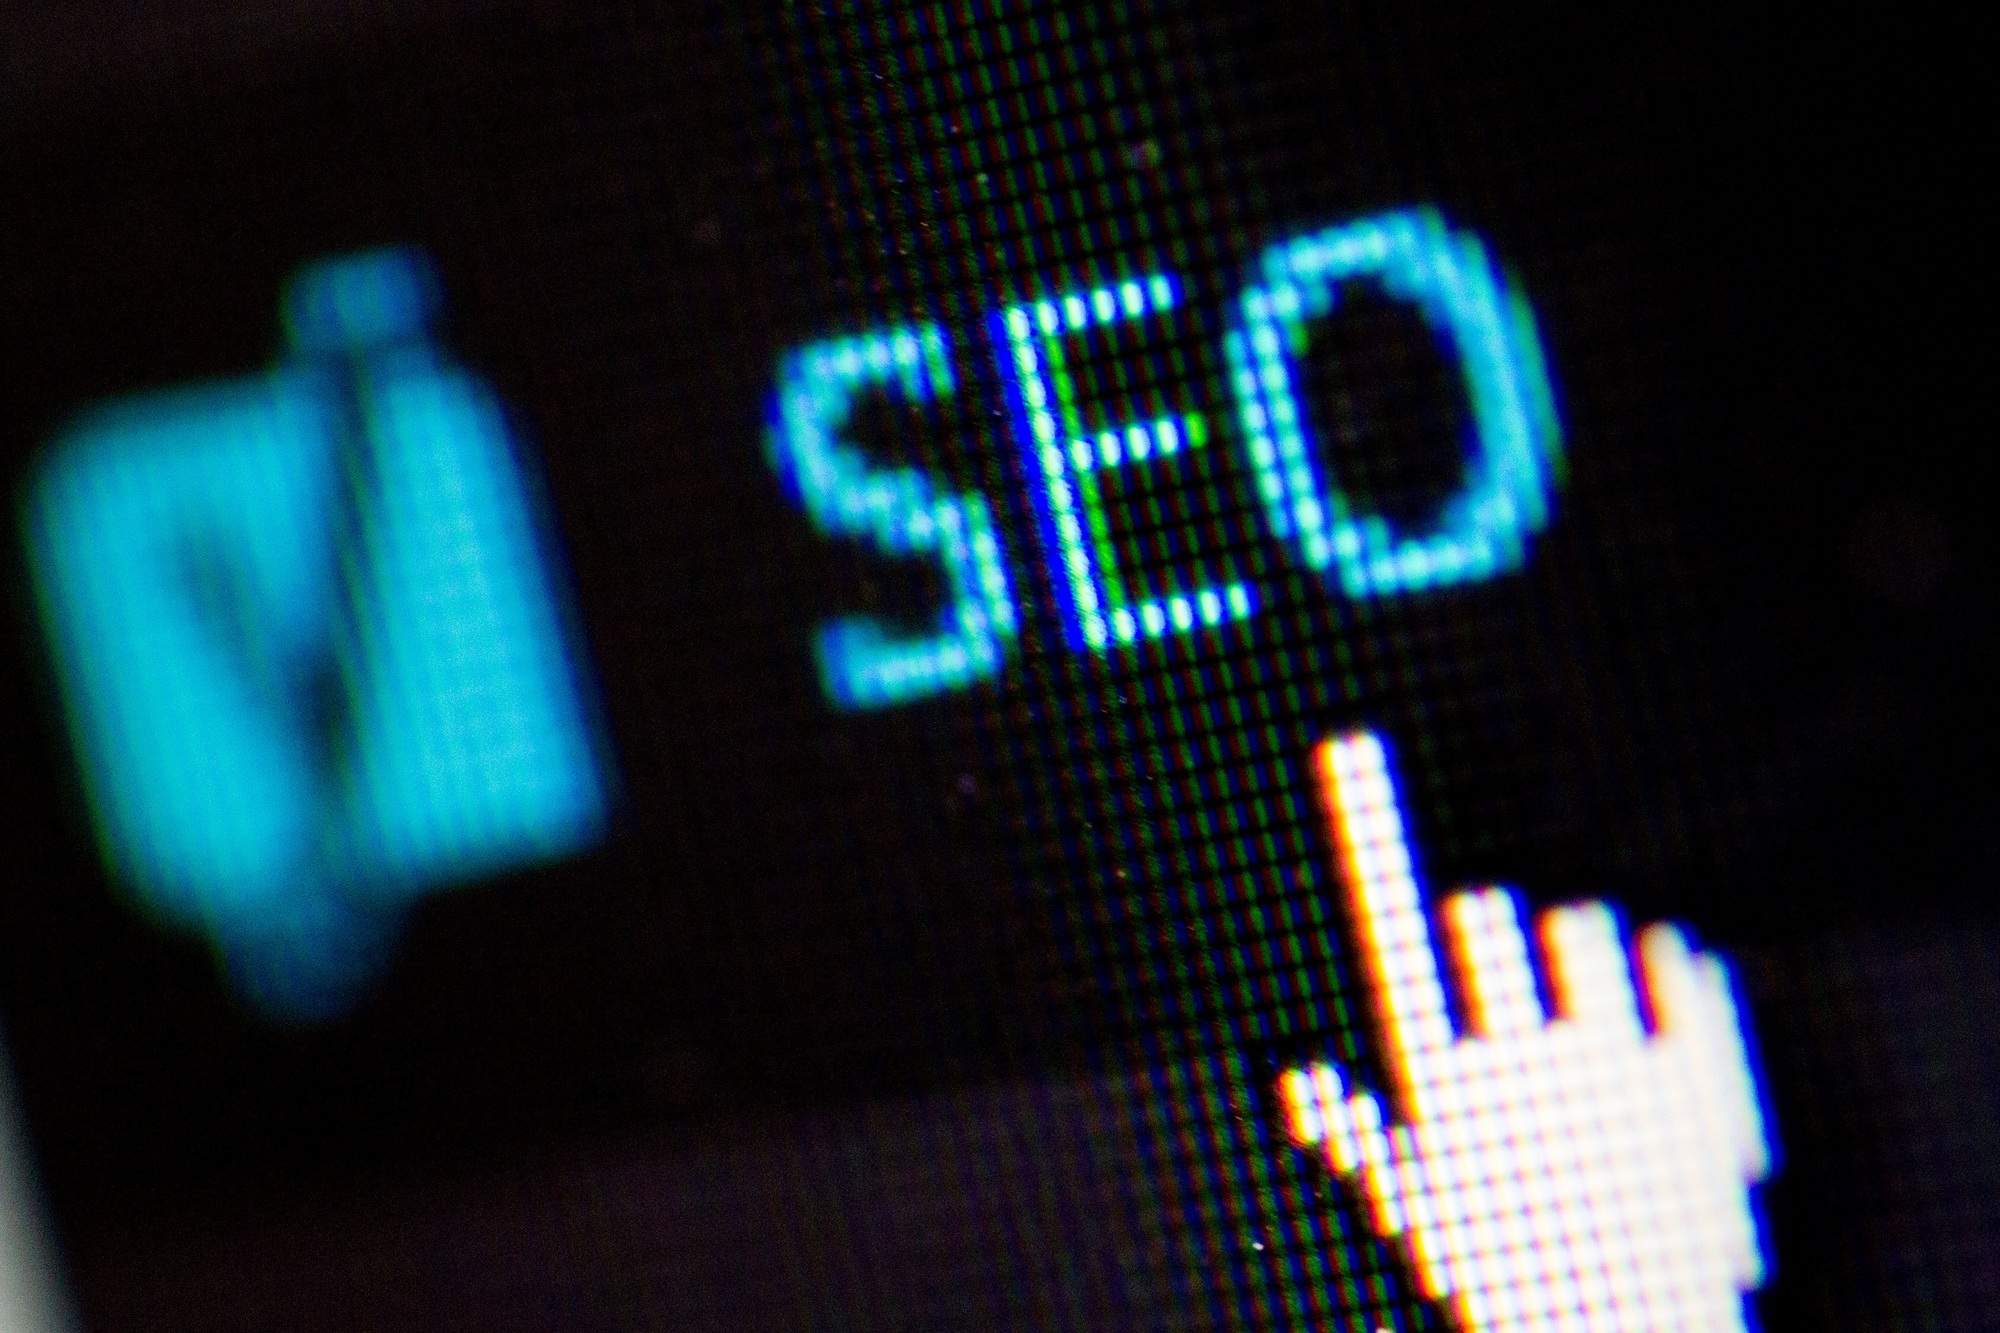 Top 6 SEO Fundamentals You Should Consider for Your Business